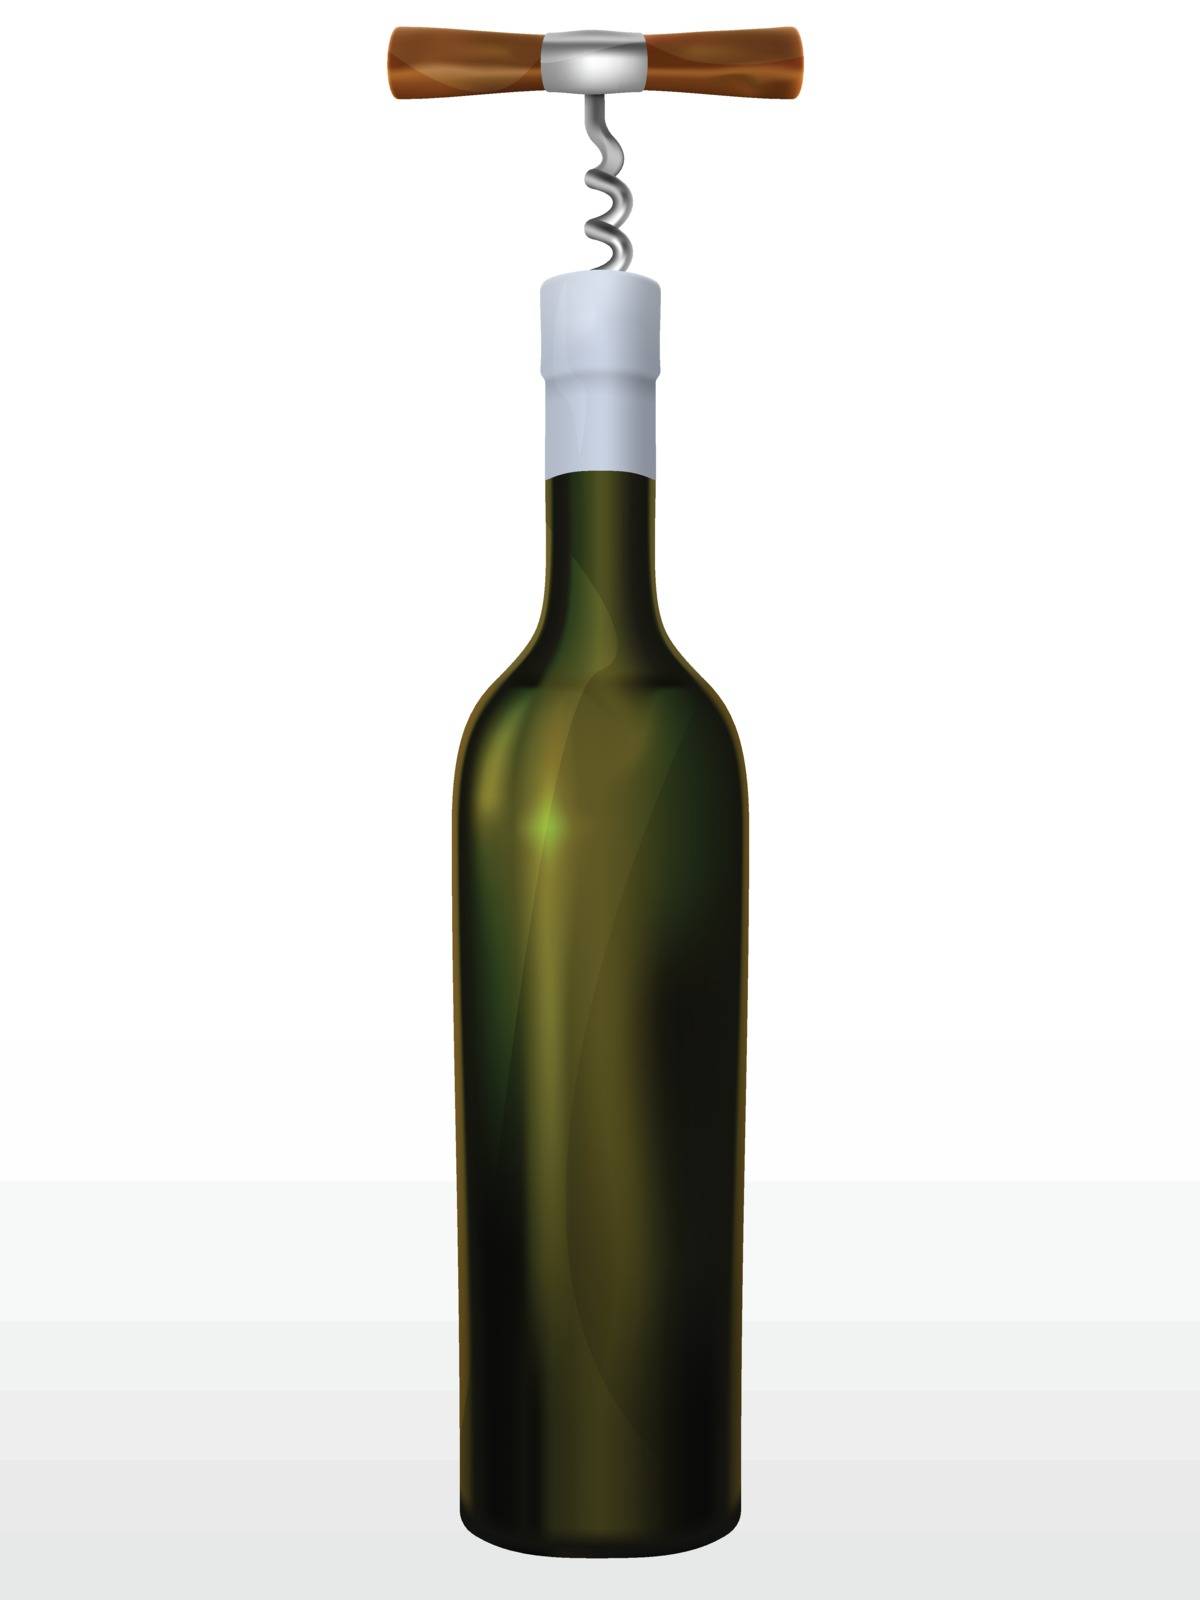 Bottle of wine and corkscrew by nikolaich